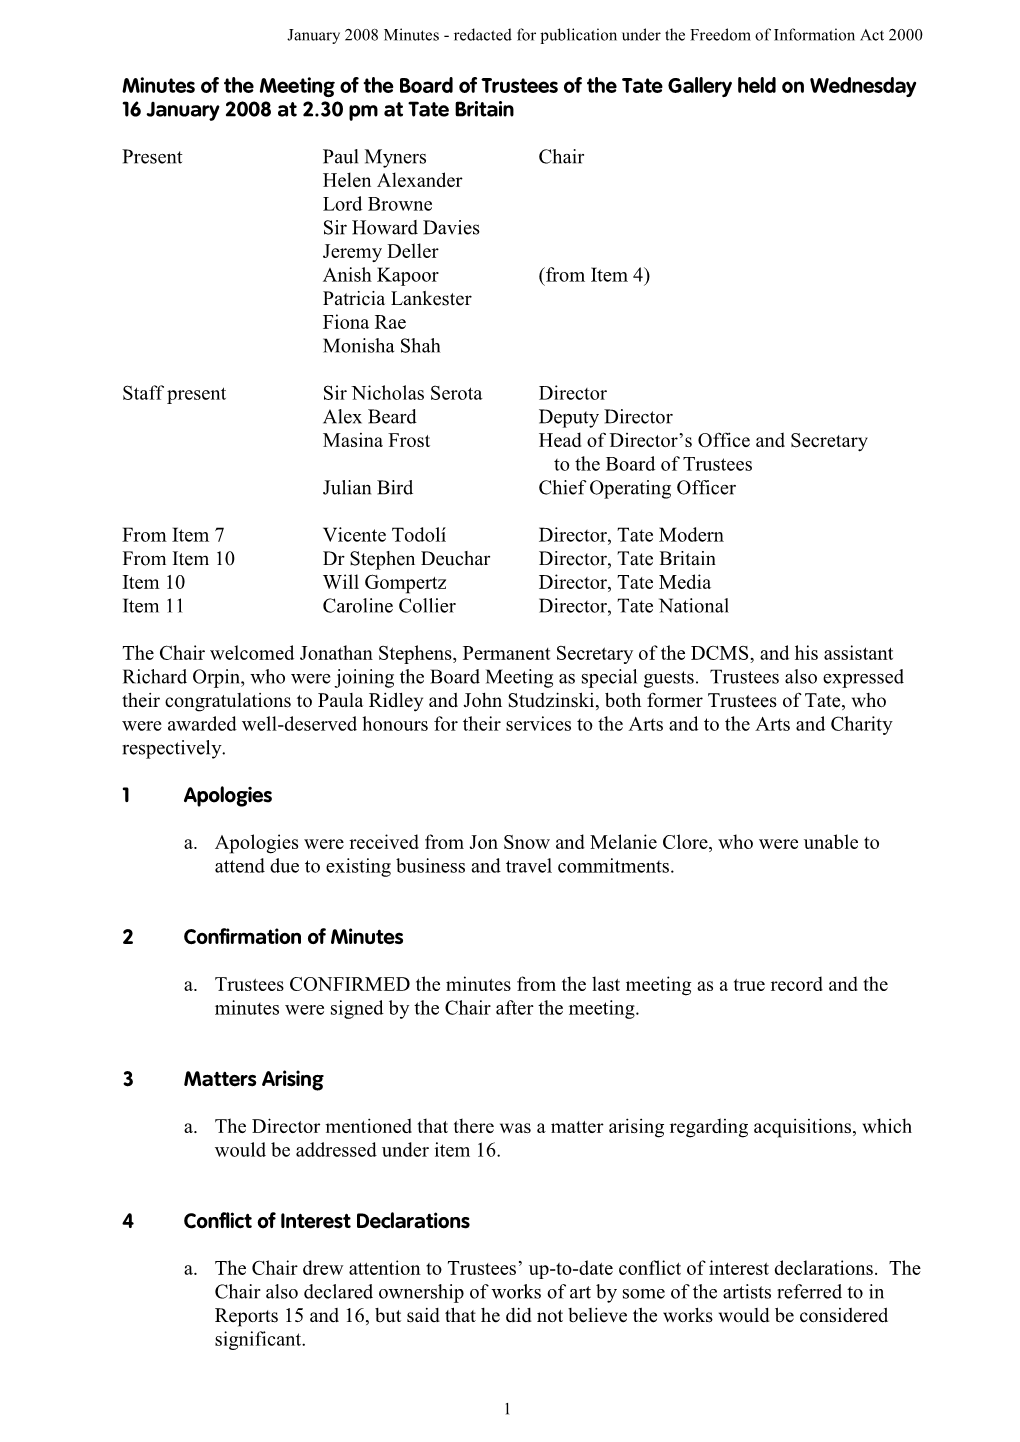 Minutes of the Meeting of the Board of Trustees of the Tate Gallery Held on Wednesday 16 January 2008 at 2.30 Pm at Tate Britain